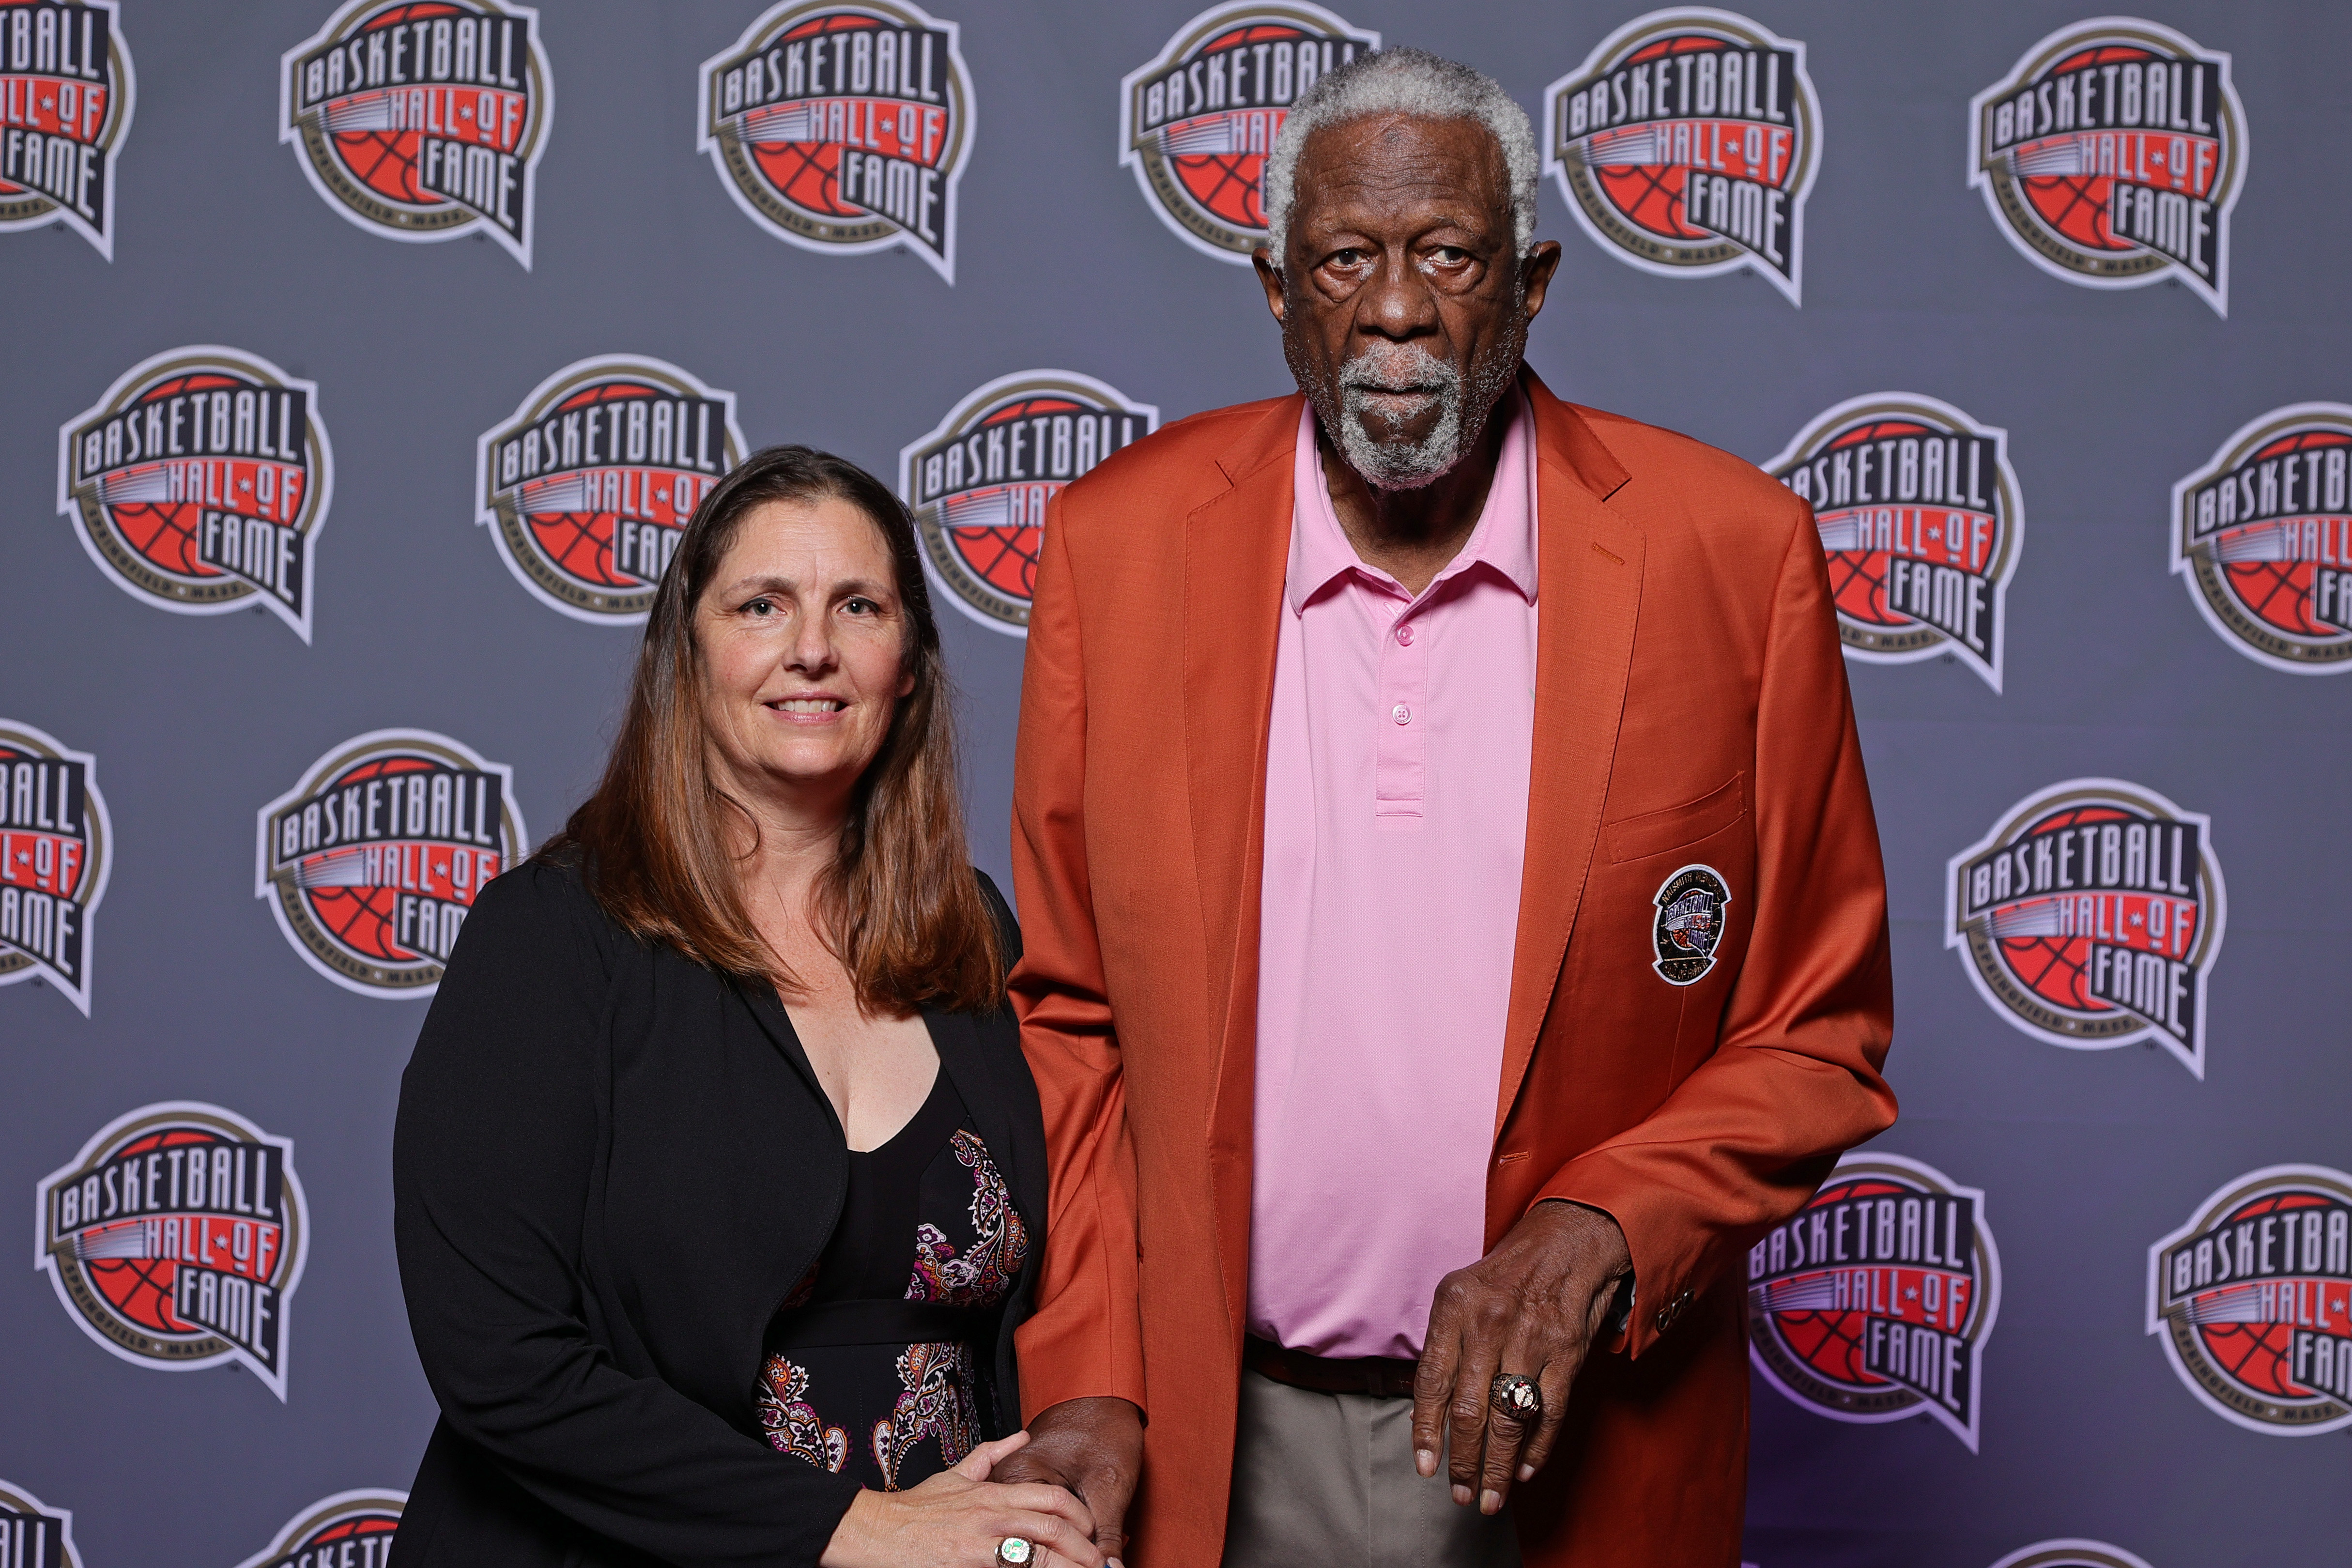 Jeannine and Bill Russell during the Class of 2021 Tip-Off Celebration and Awards Gala as part of the 2021 Basketball Hall of Fame Enshrinement Ceremony on September 10, 2021, in Uncasville, Connecticut. | Source: Getty Images